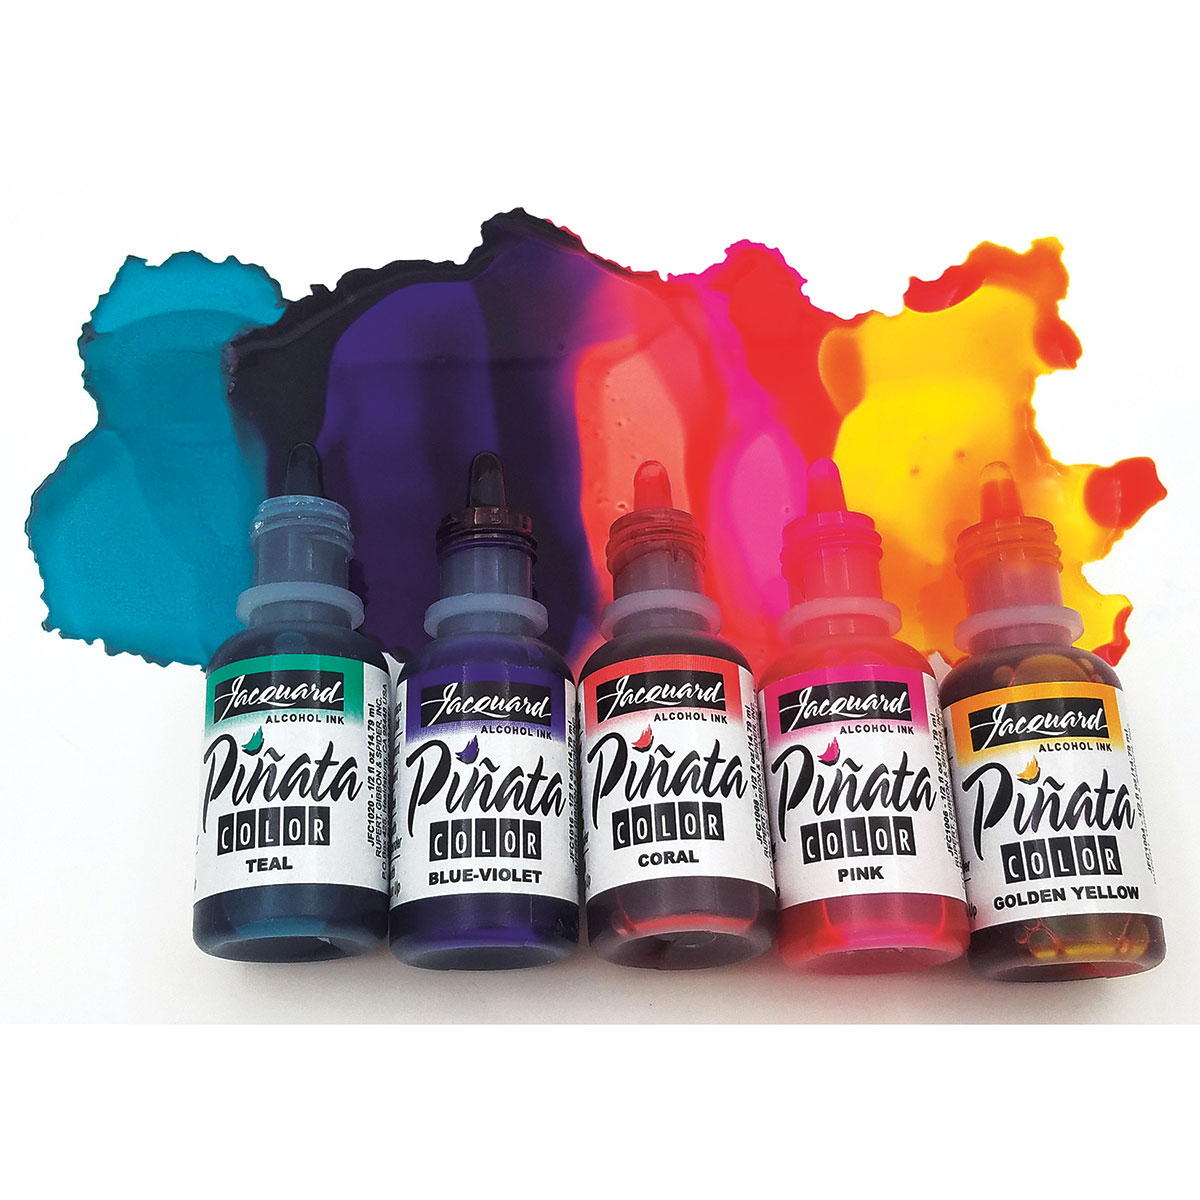  Jacquard Pinata Alcohol Ink - Rich Gold - Professional and  Versatile Ink That Produces Color Saturated and Acid-Free Results - 4 Fluid  Ounces - Made in The USA